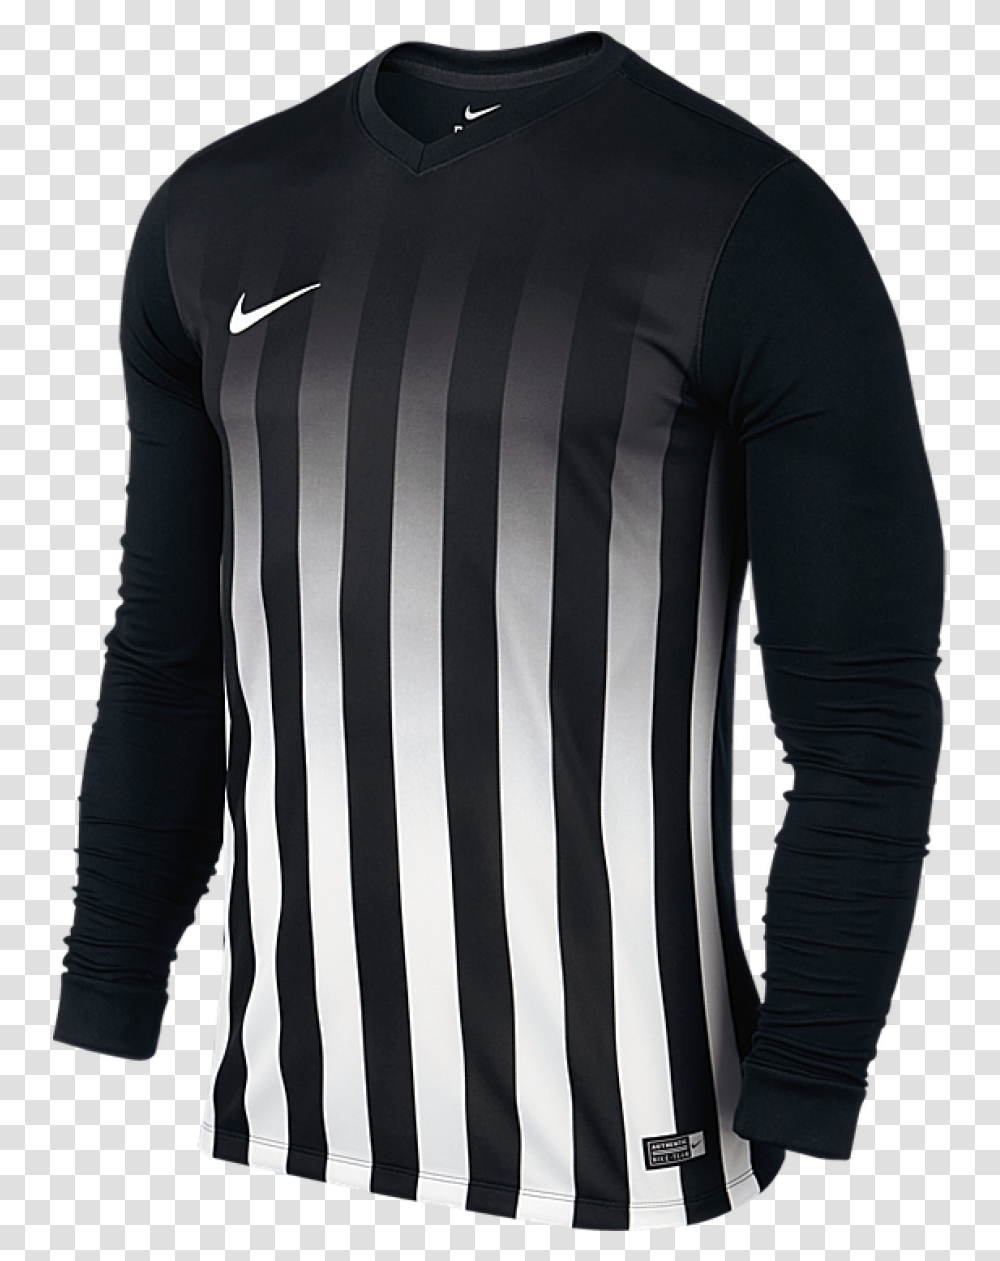 Nike Football Shirt Striped Division Ls Blackwhite Nike Striped Division Iii Jersey, Sleeve, Apparel, Long Sleeve Transparent Png